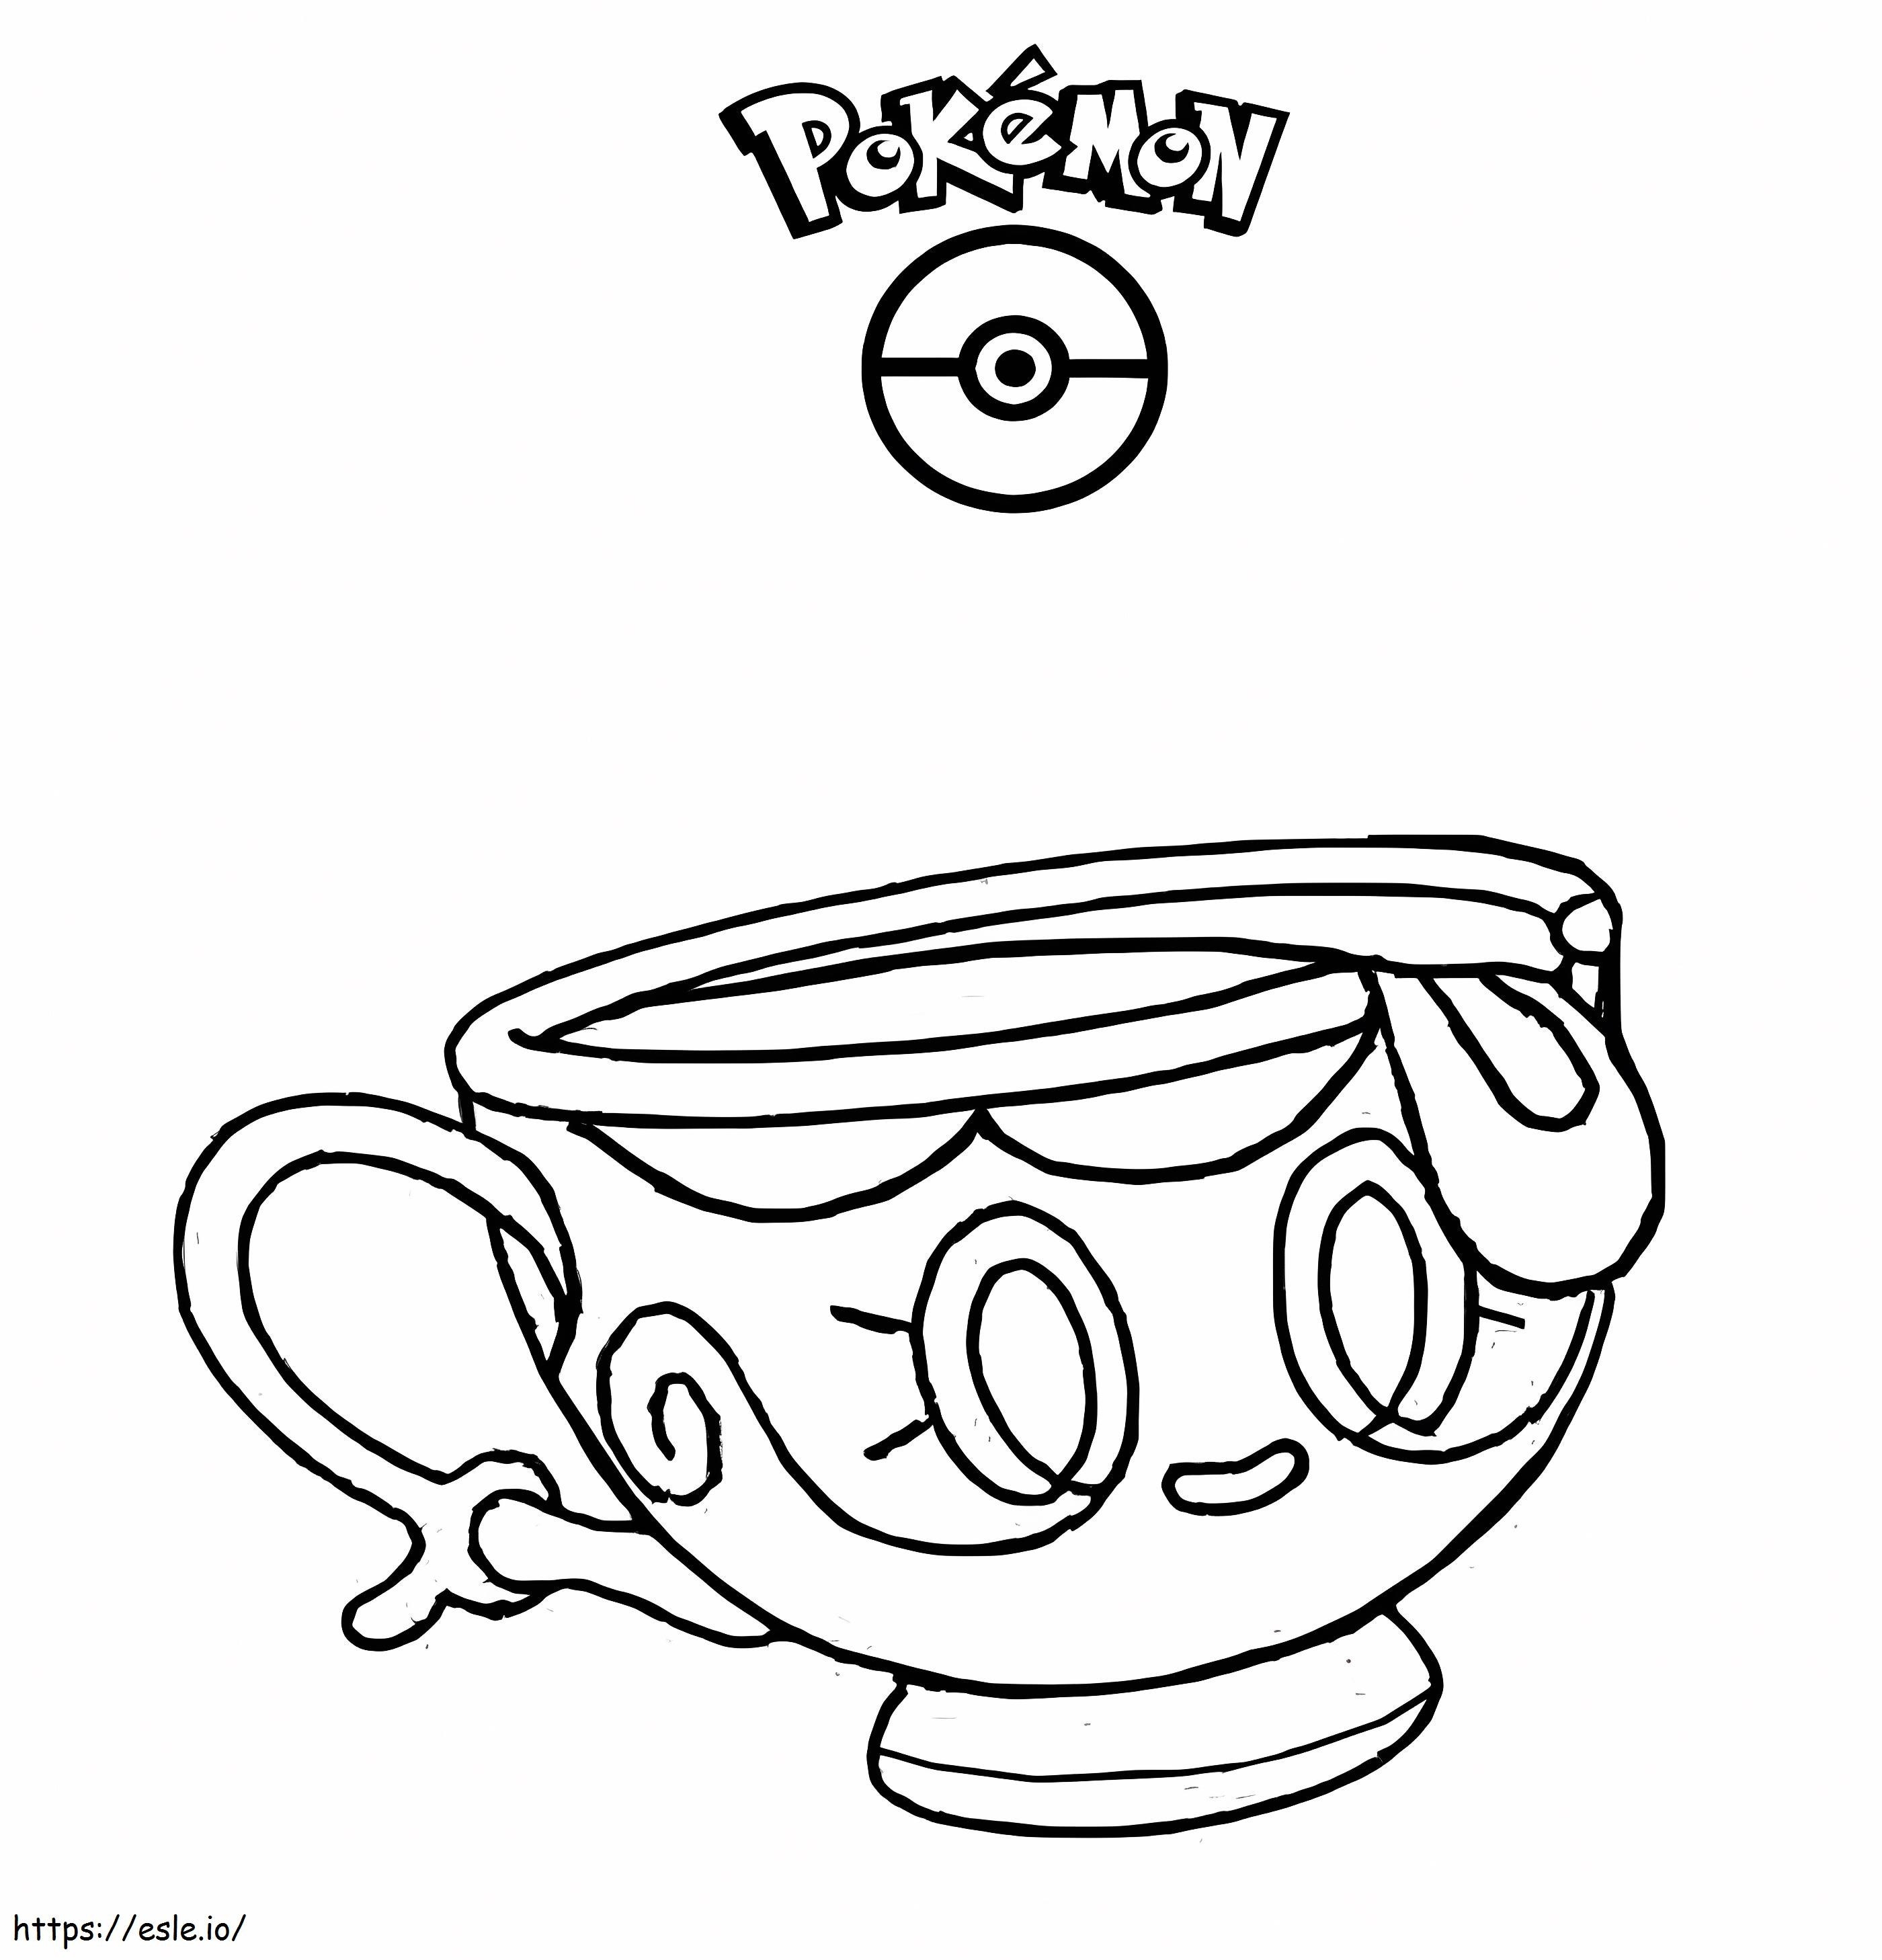 Believe In Pokemon 2 coloring page